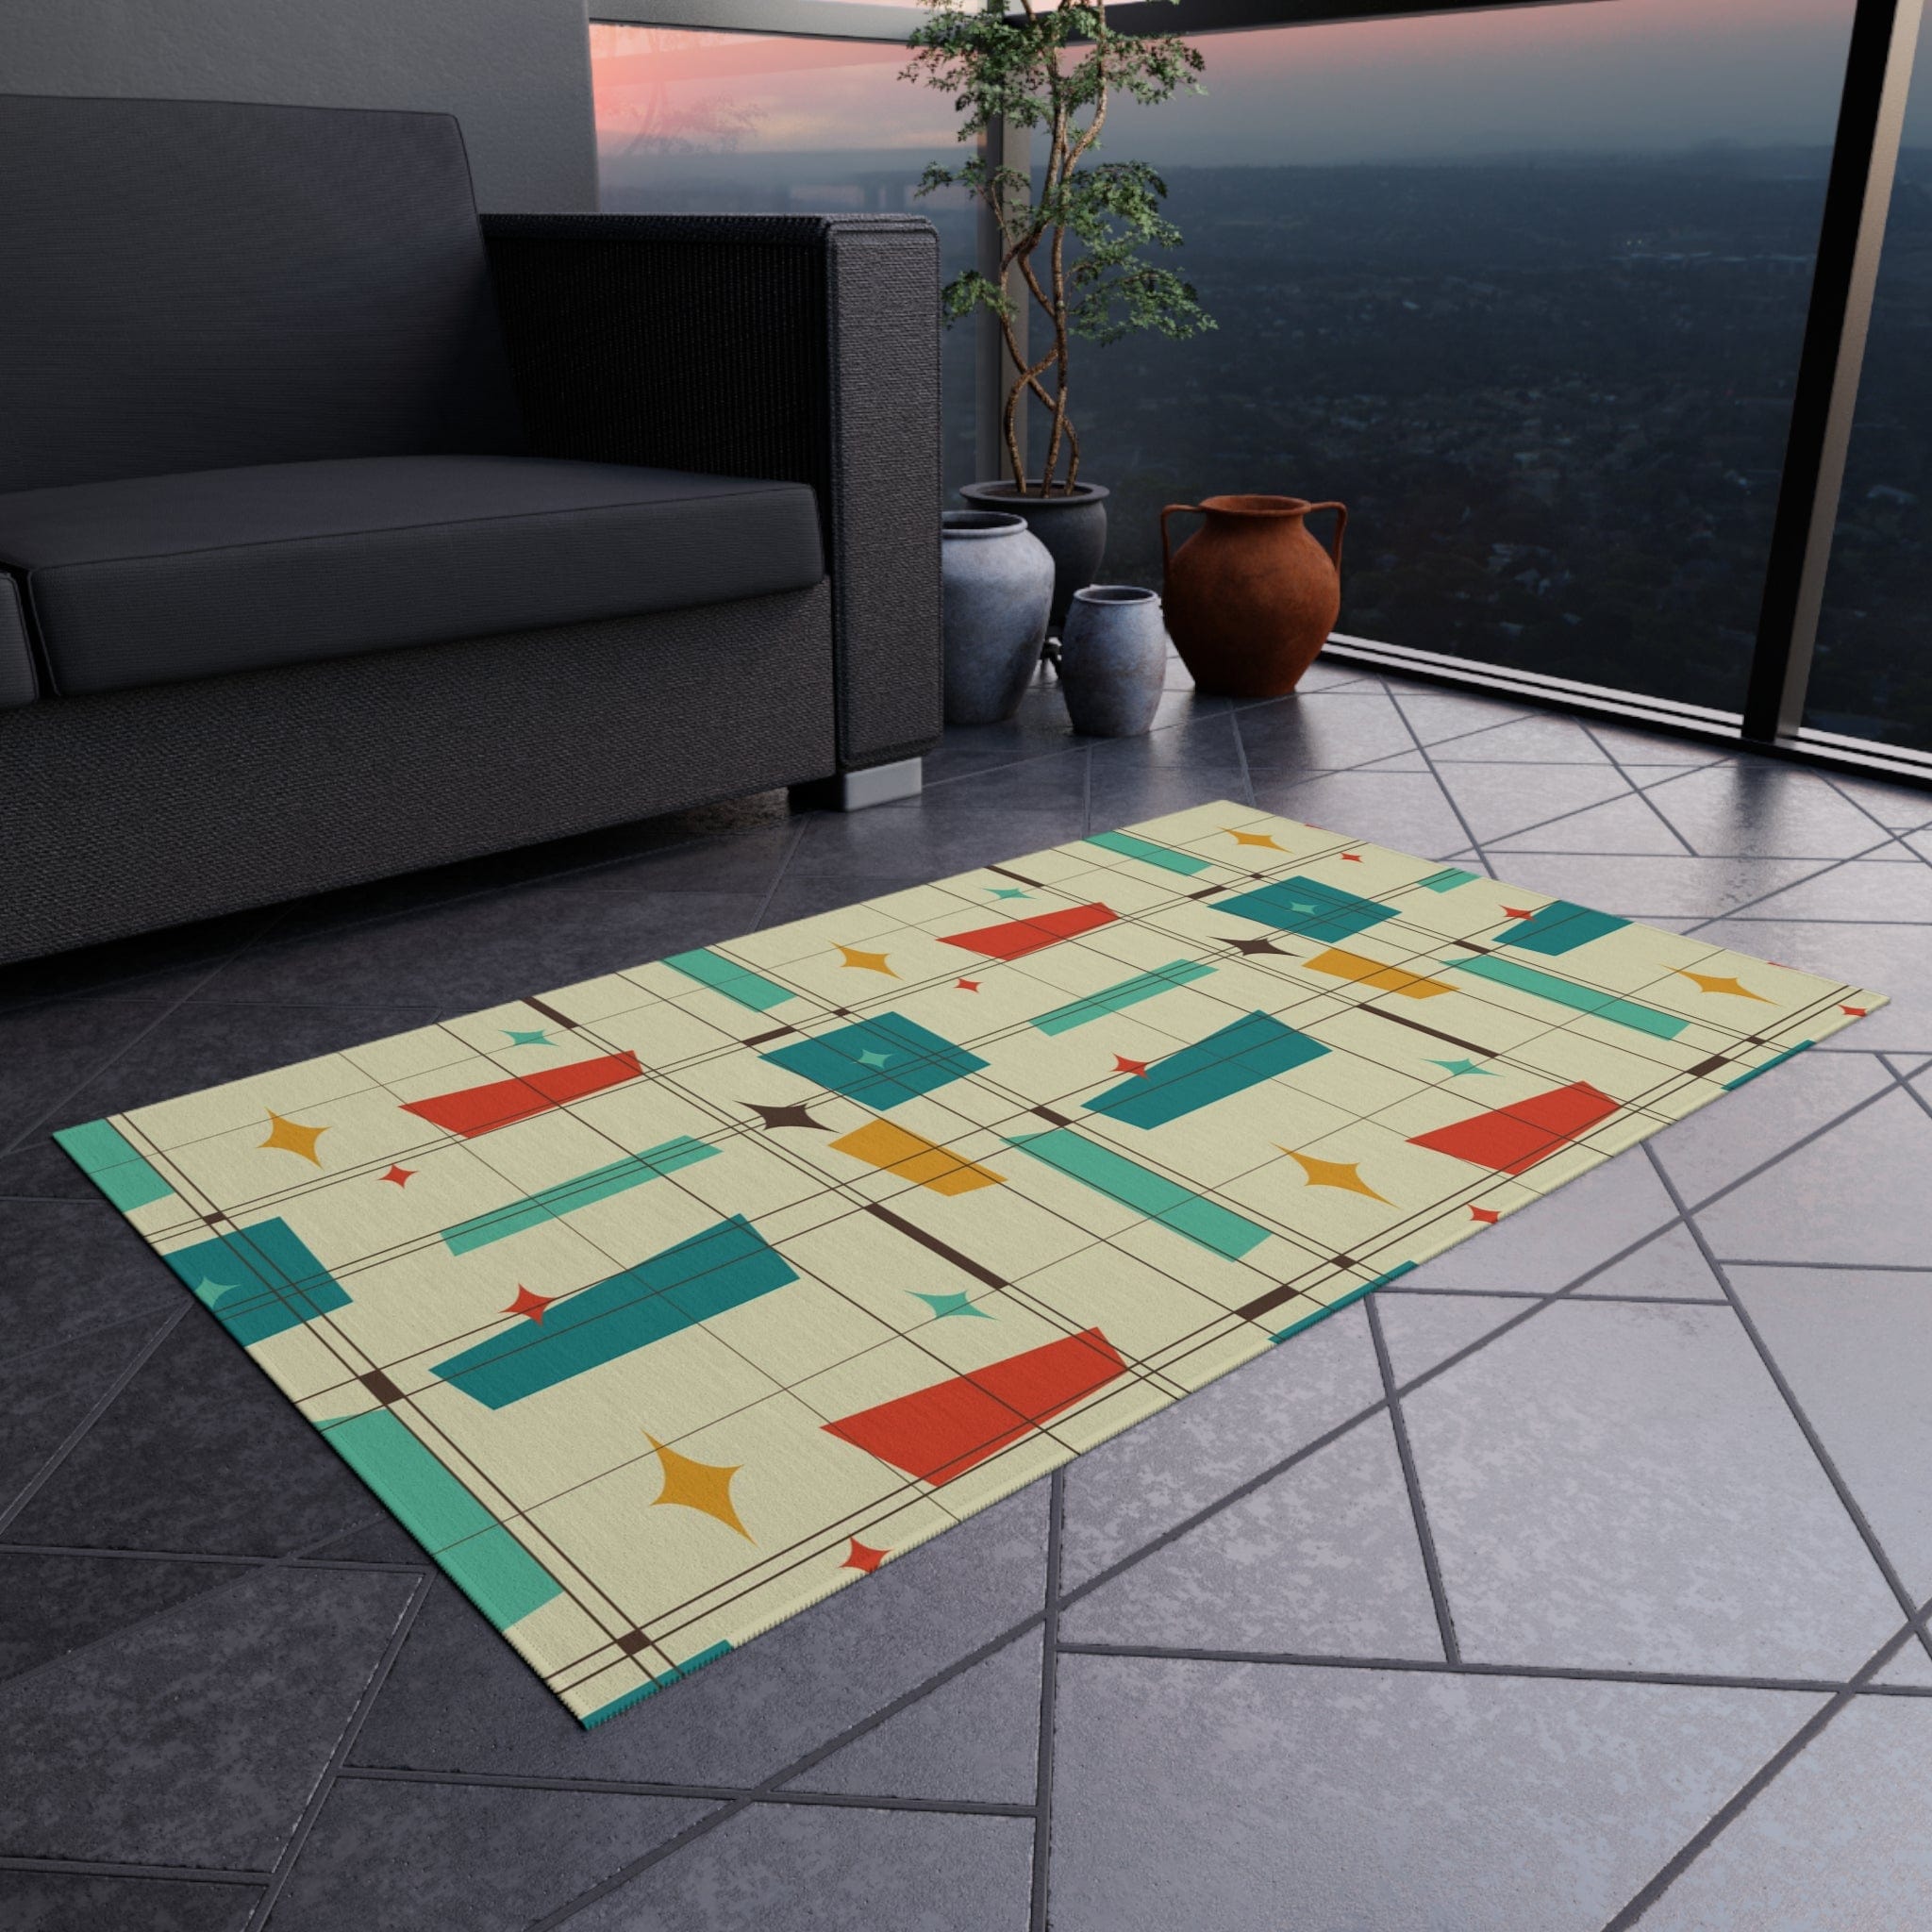 Mid Century Modern, Indoor, Outdoor Rug, Geometric Squares, Mid Mod Palm Spring Cali Home Decor Home Decor